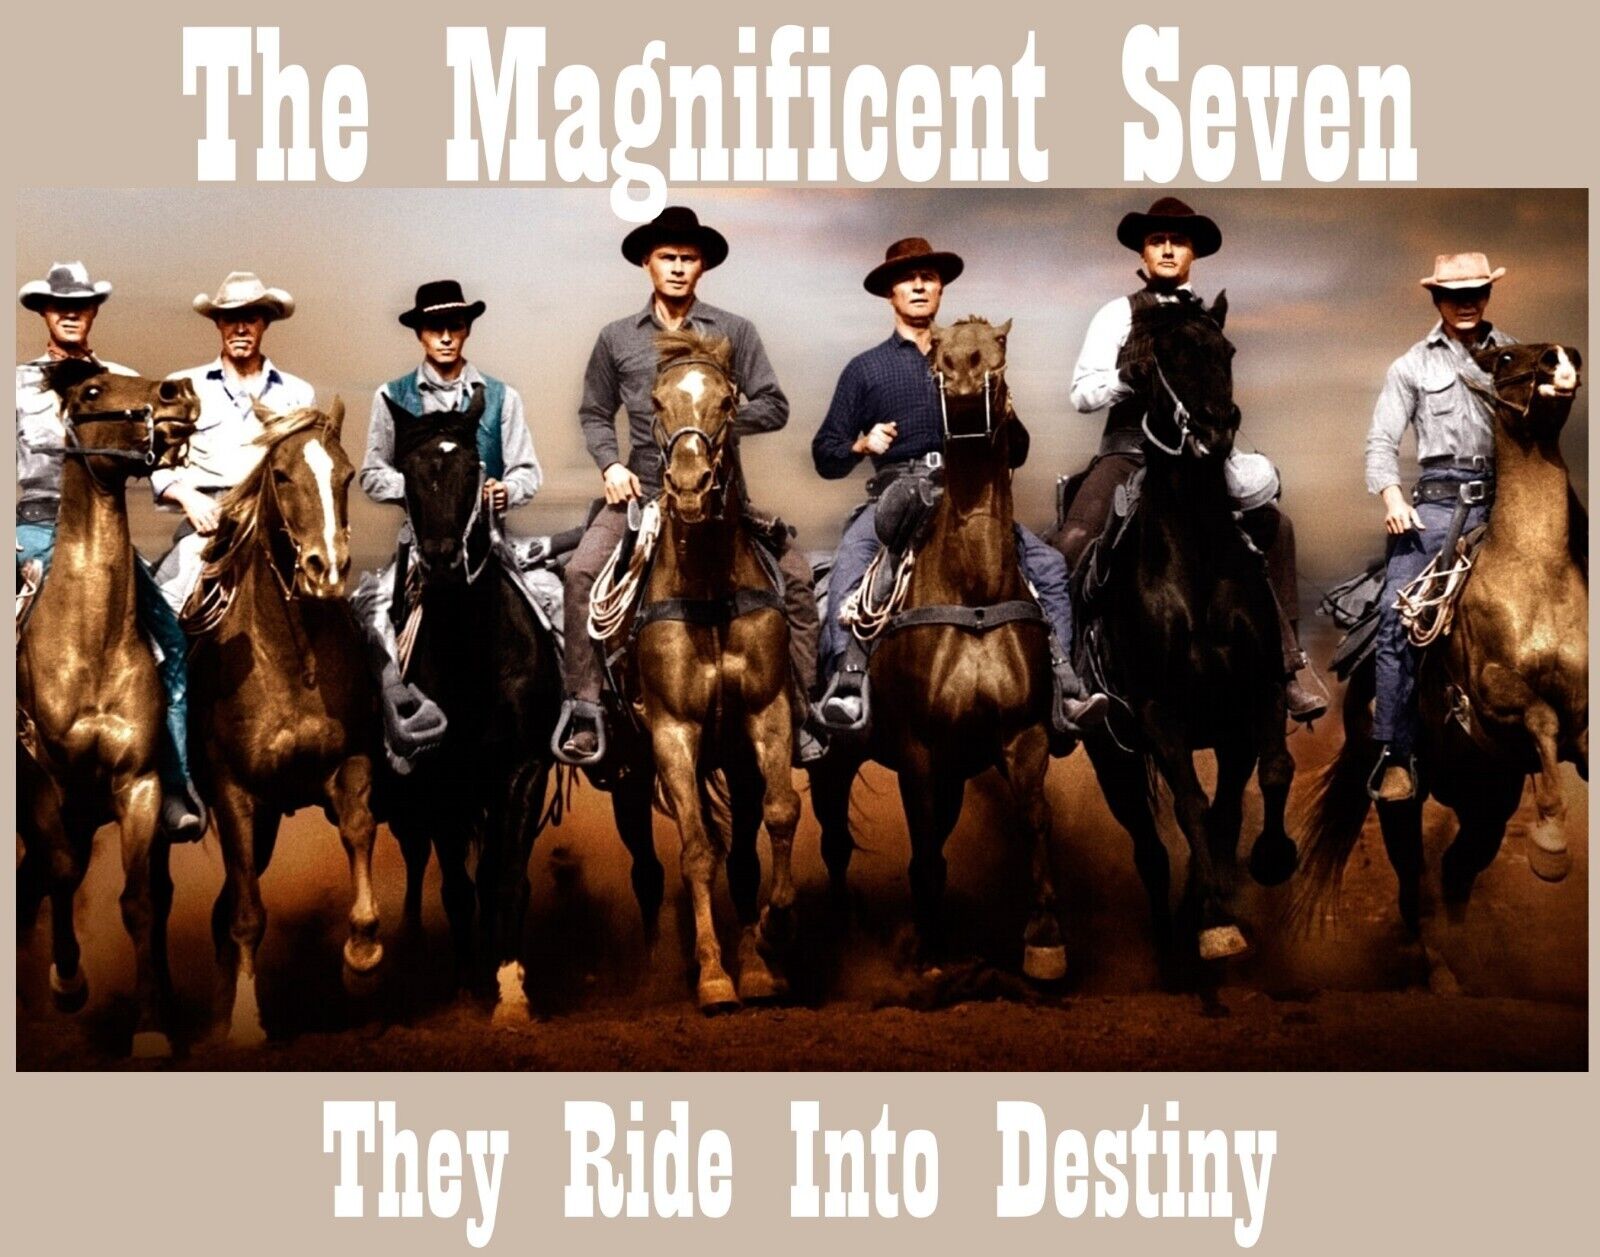 The Magnificent Seven Ride an 8x10 Photo Art Poster  Print  8x10 vintage